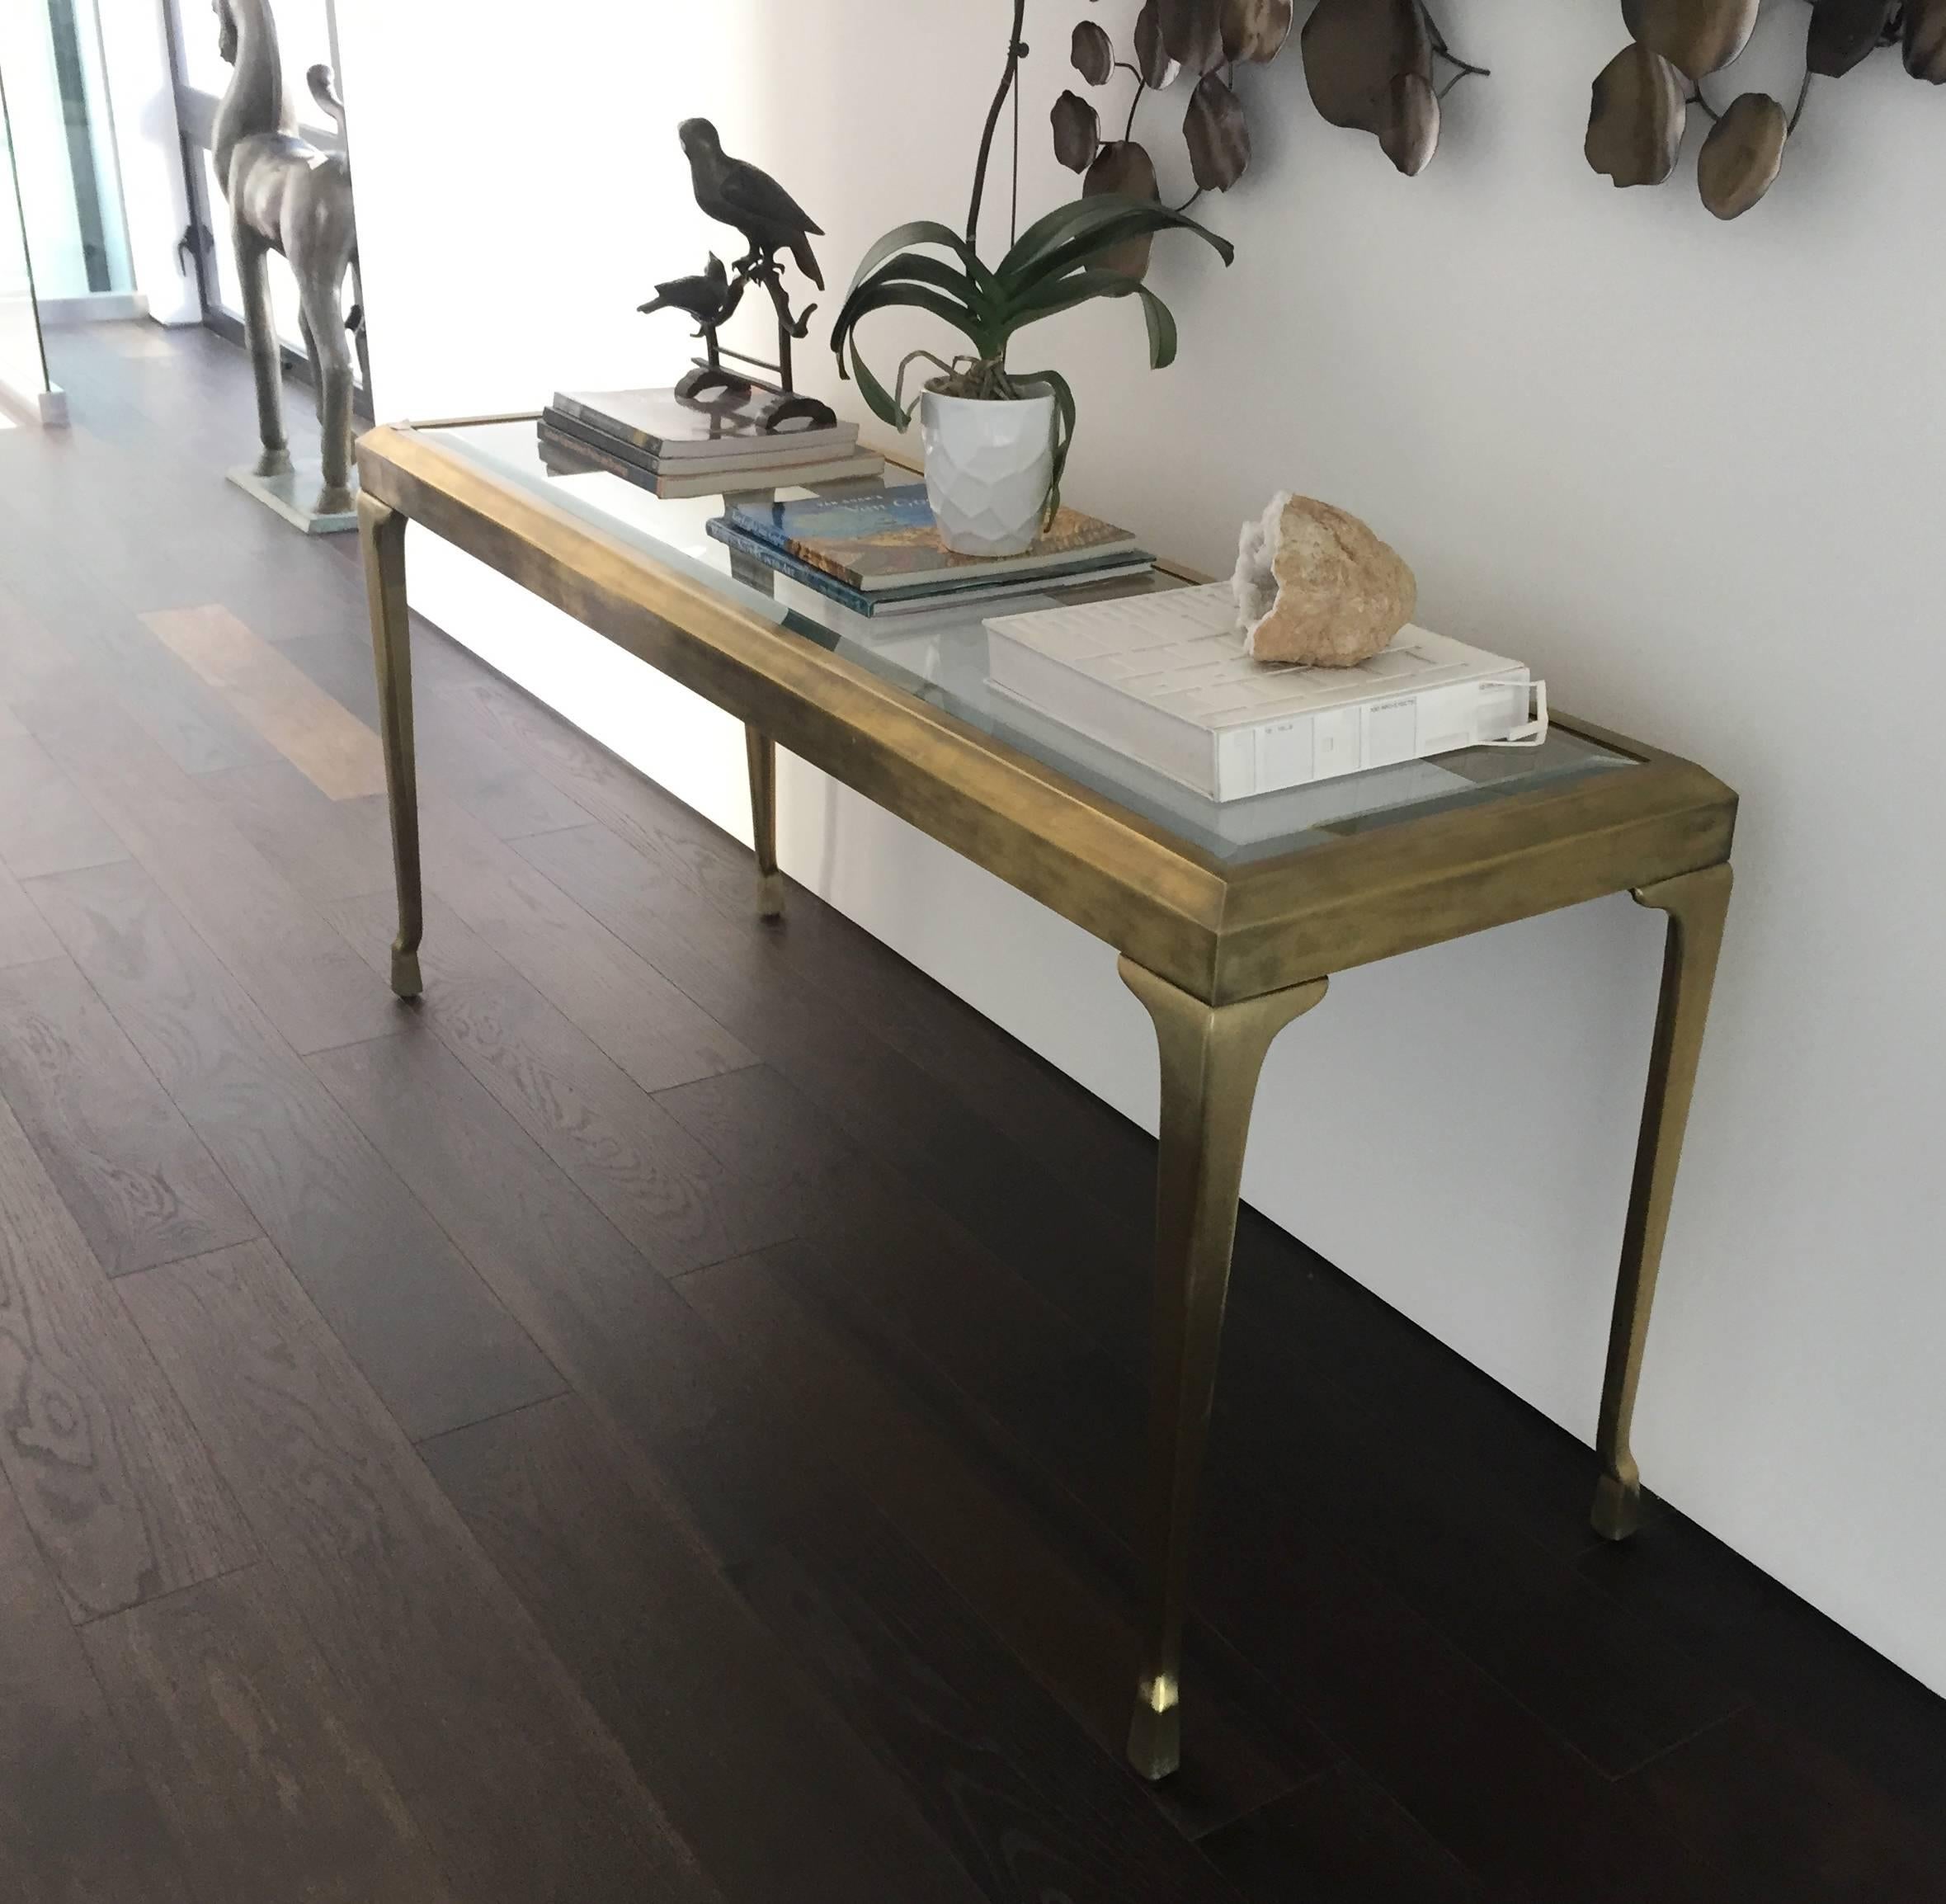 Stunning and beautiful hall or console table in solid brass and glass top designed and manufactured by Mastercraft.
The table has a very nice aged patina and shows very well.
 